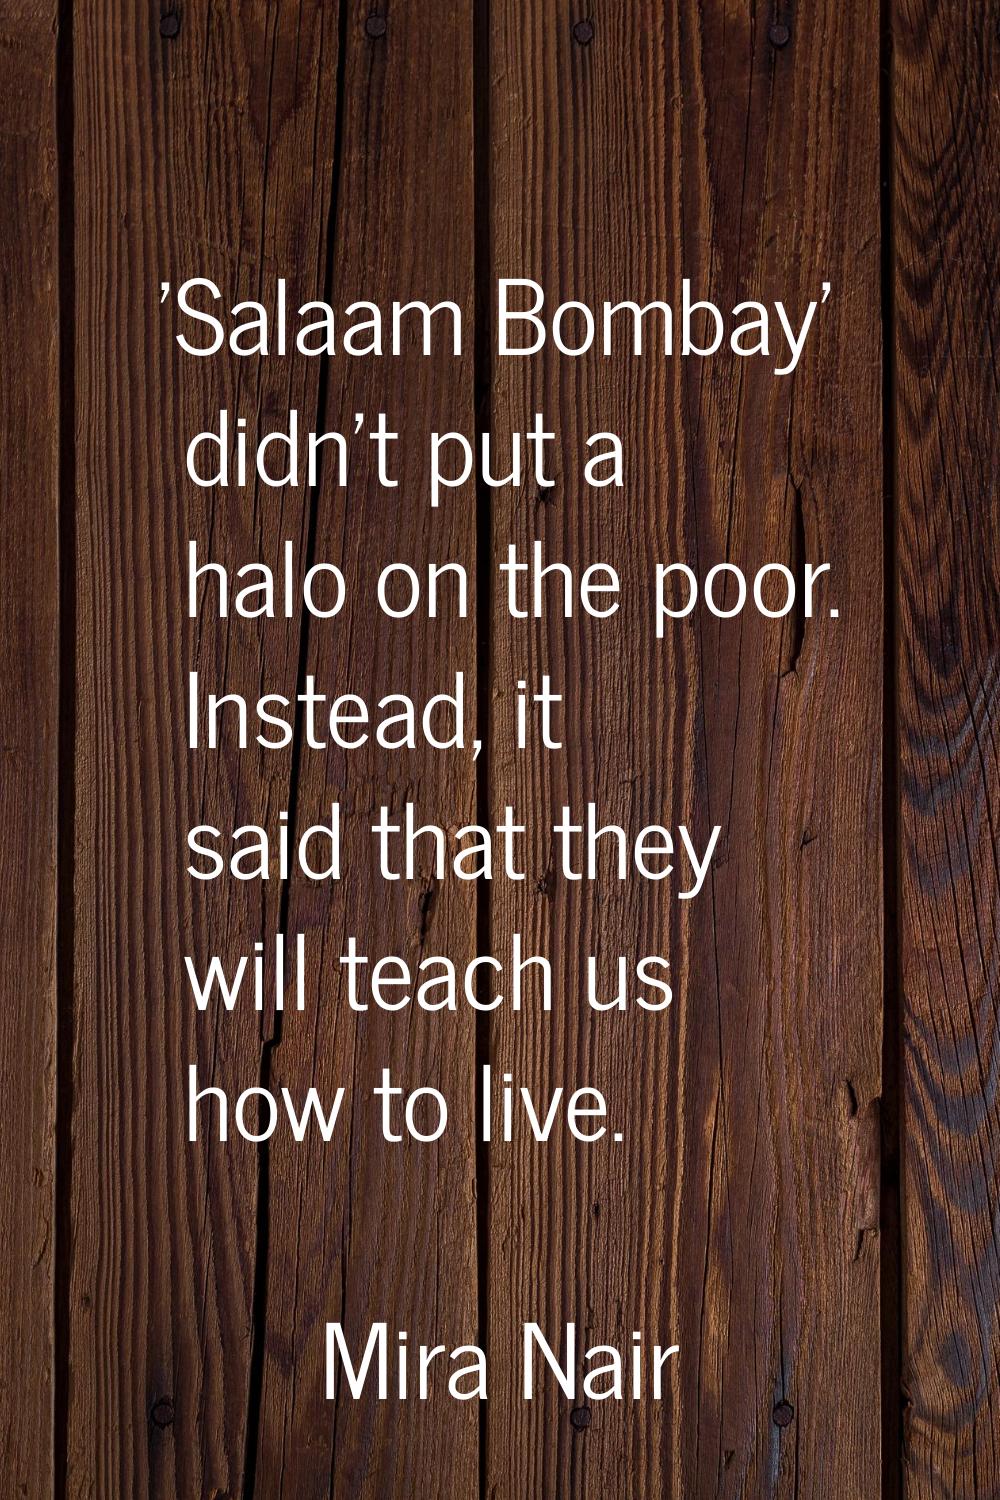 'Salaam Bombay' didn't put a halo on the poor. Instead, it said that they will teach us how to live